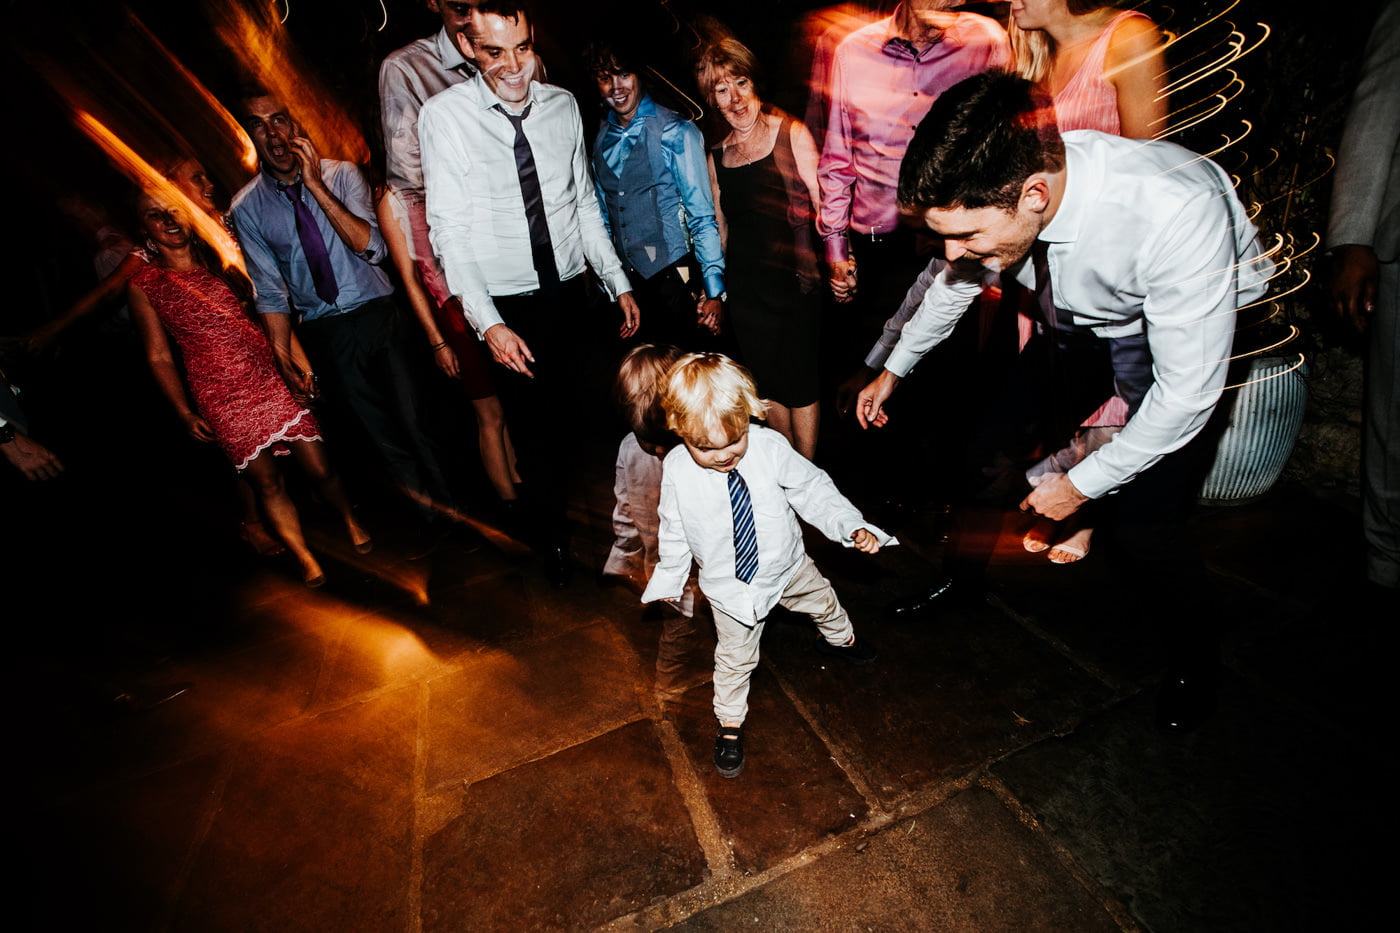 Amelia and Dave, Cripps Barn, Cotswolds 12